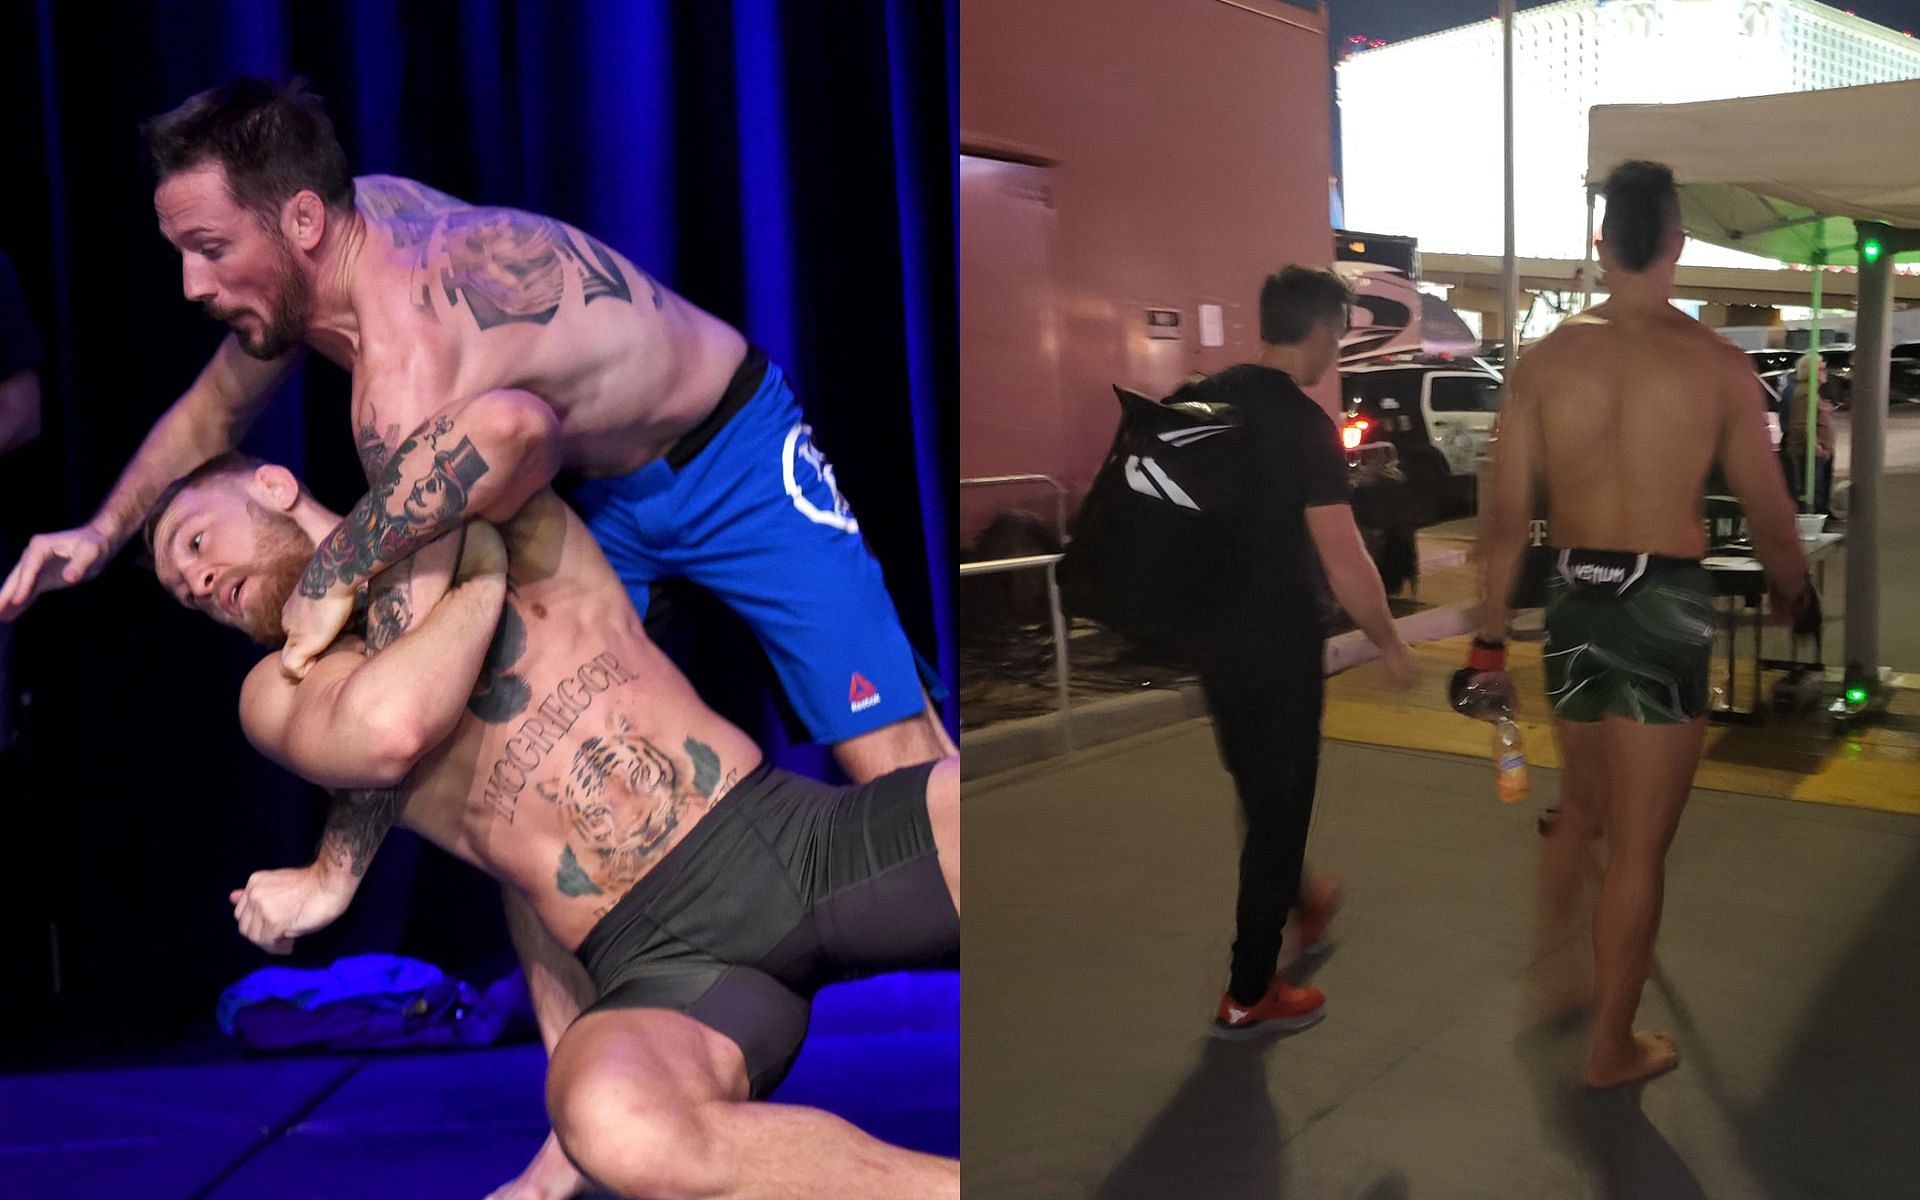 Conor McGregor and John Kavanagh (left), Kavanagh and Johnny Walker (right) [images courtesy of @John_Kavanagh on Twitter]